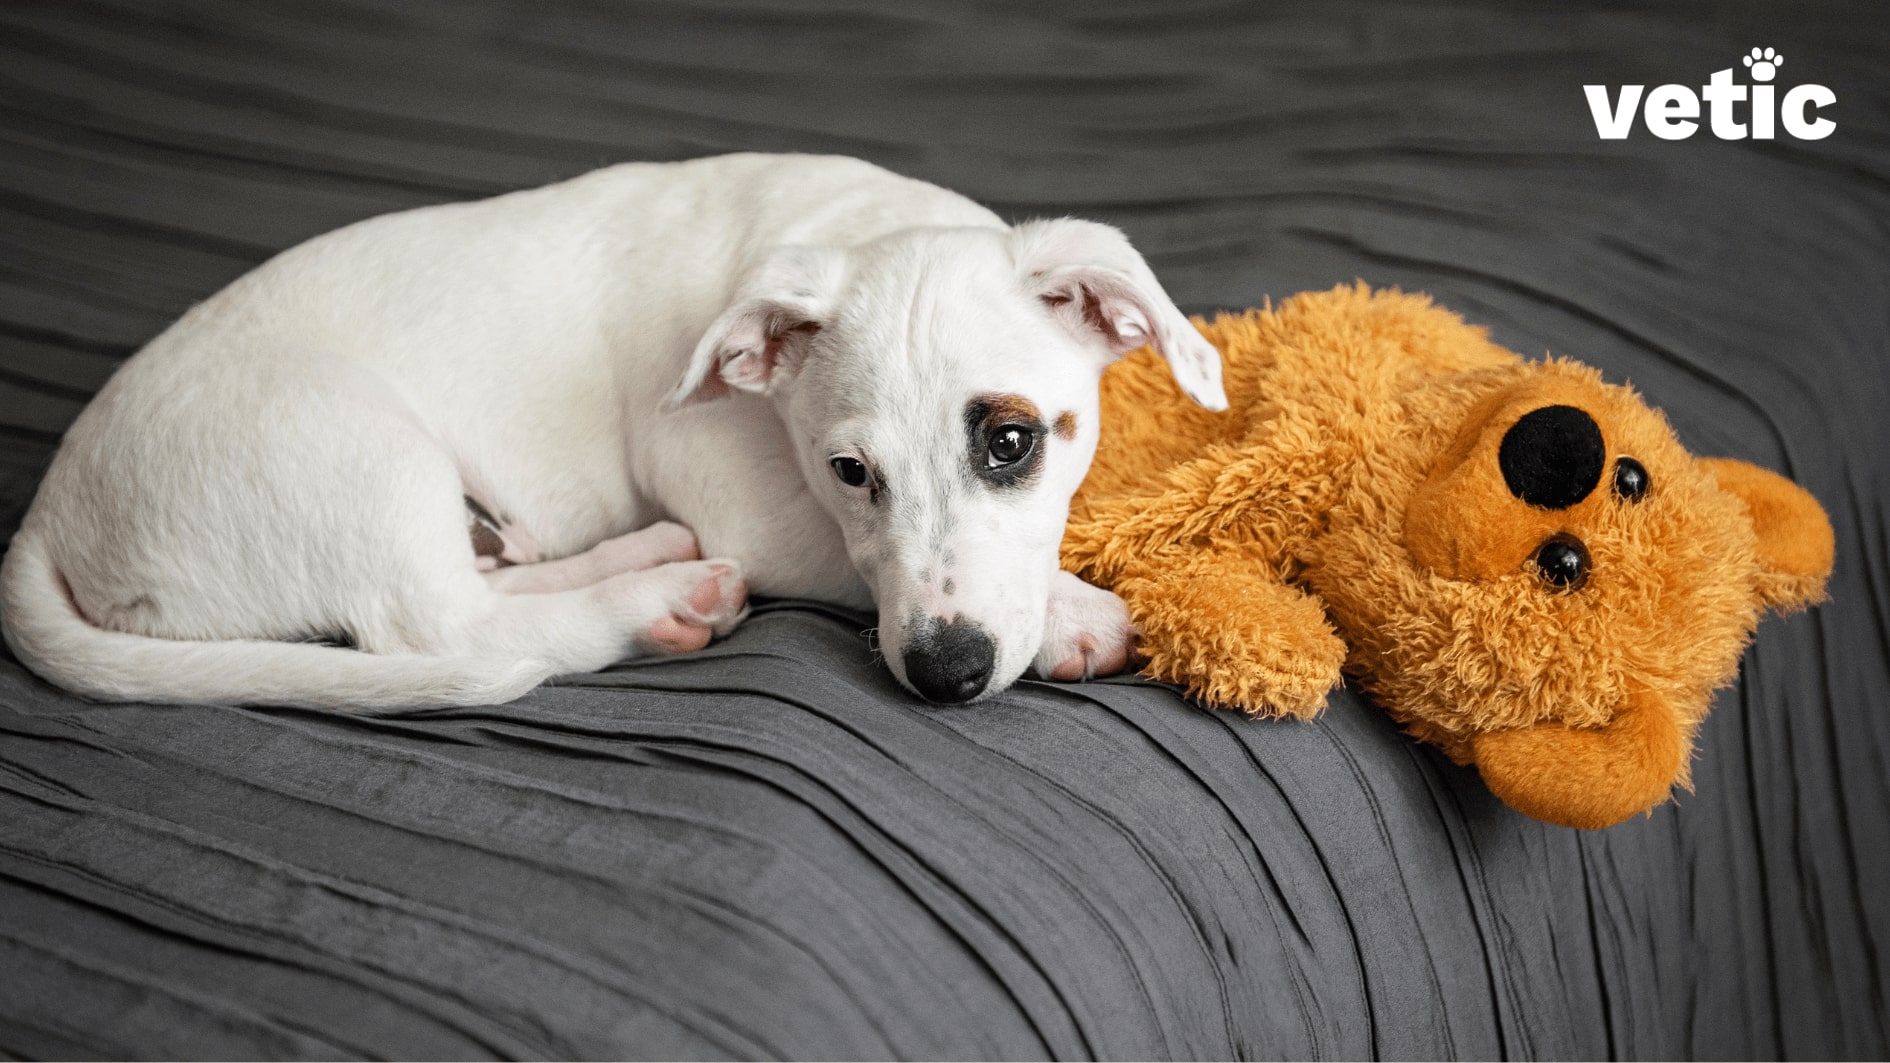 Dog lying on bed with his comfort teddy. Lethargy can be a sign of CKD in dogs